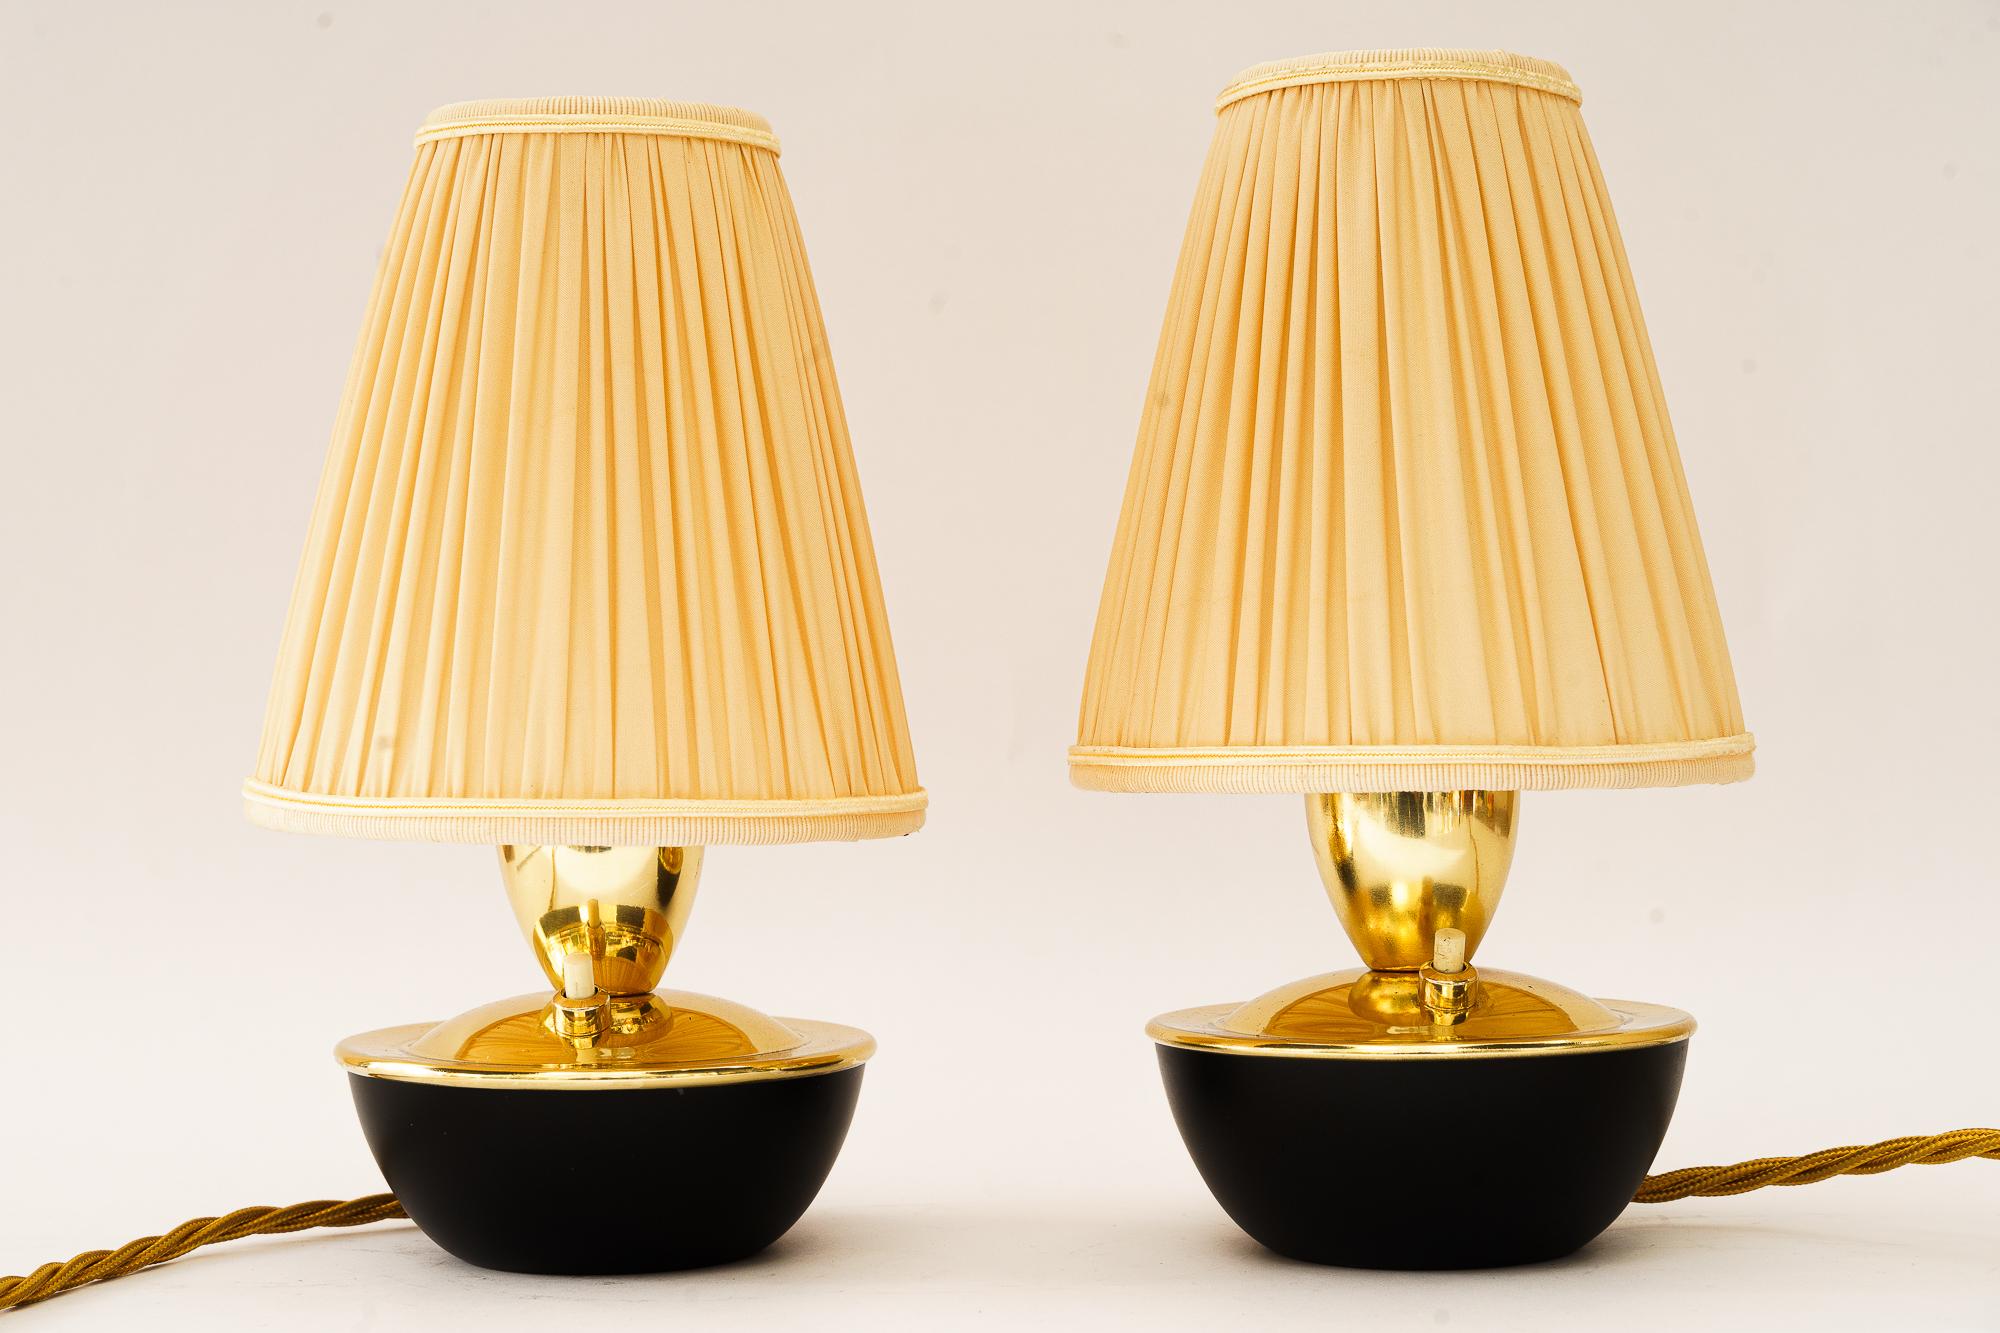 2 Table lamps by rupert nikoll vienna around 1960s
Brass polished and stove enameled
Partly blackened
The shades are replaced ( new )